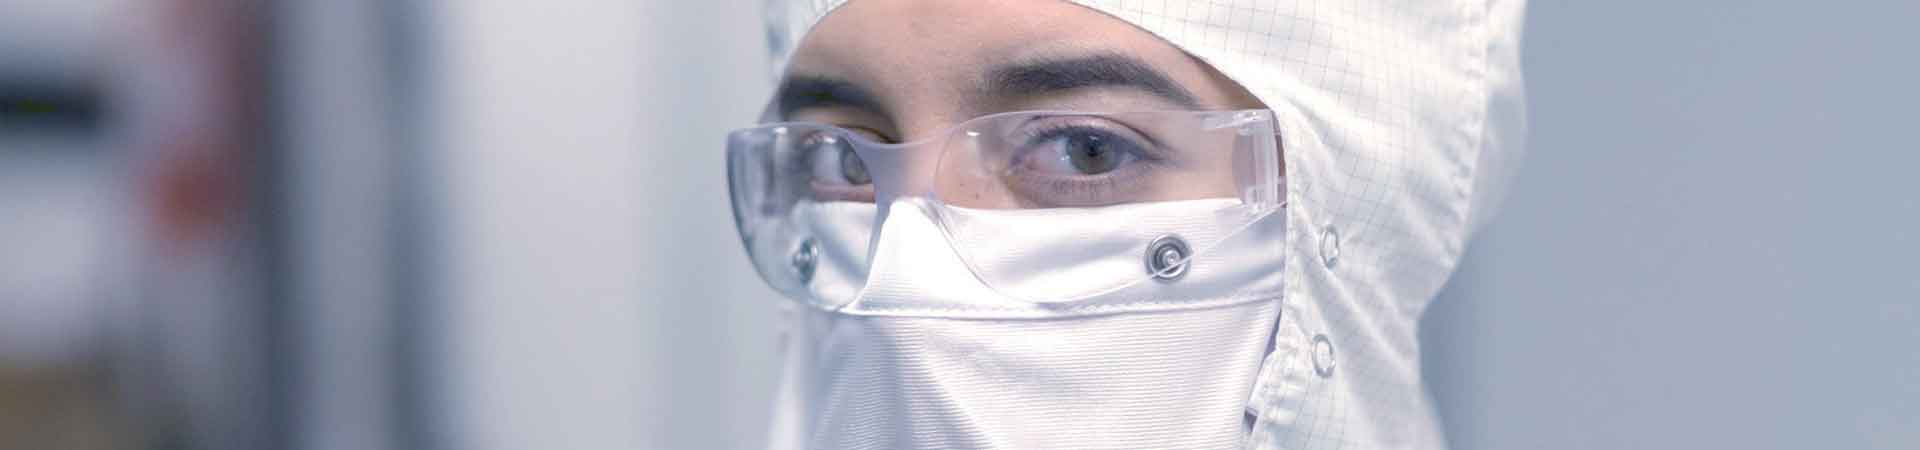 cleanroom protective clothing items to consider